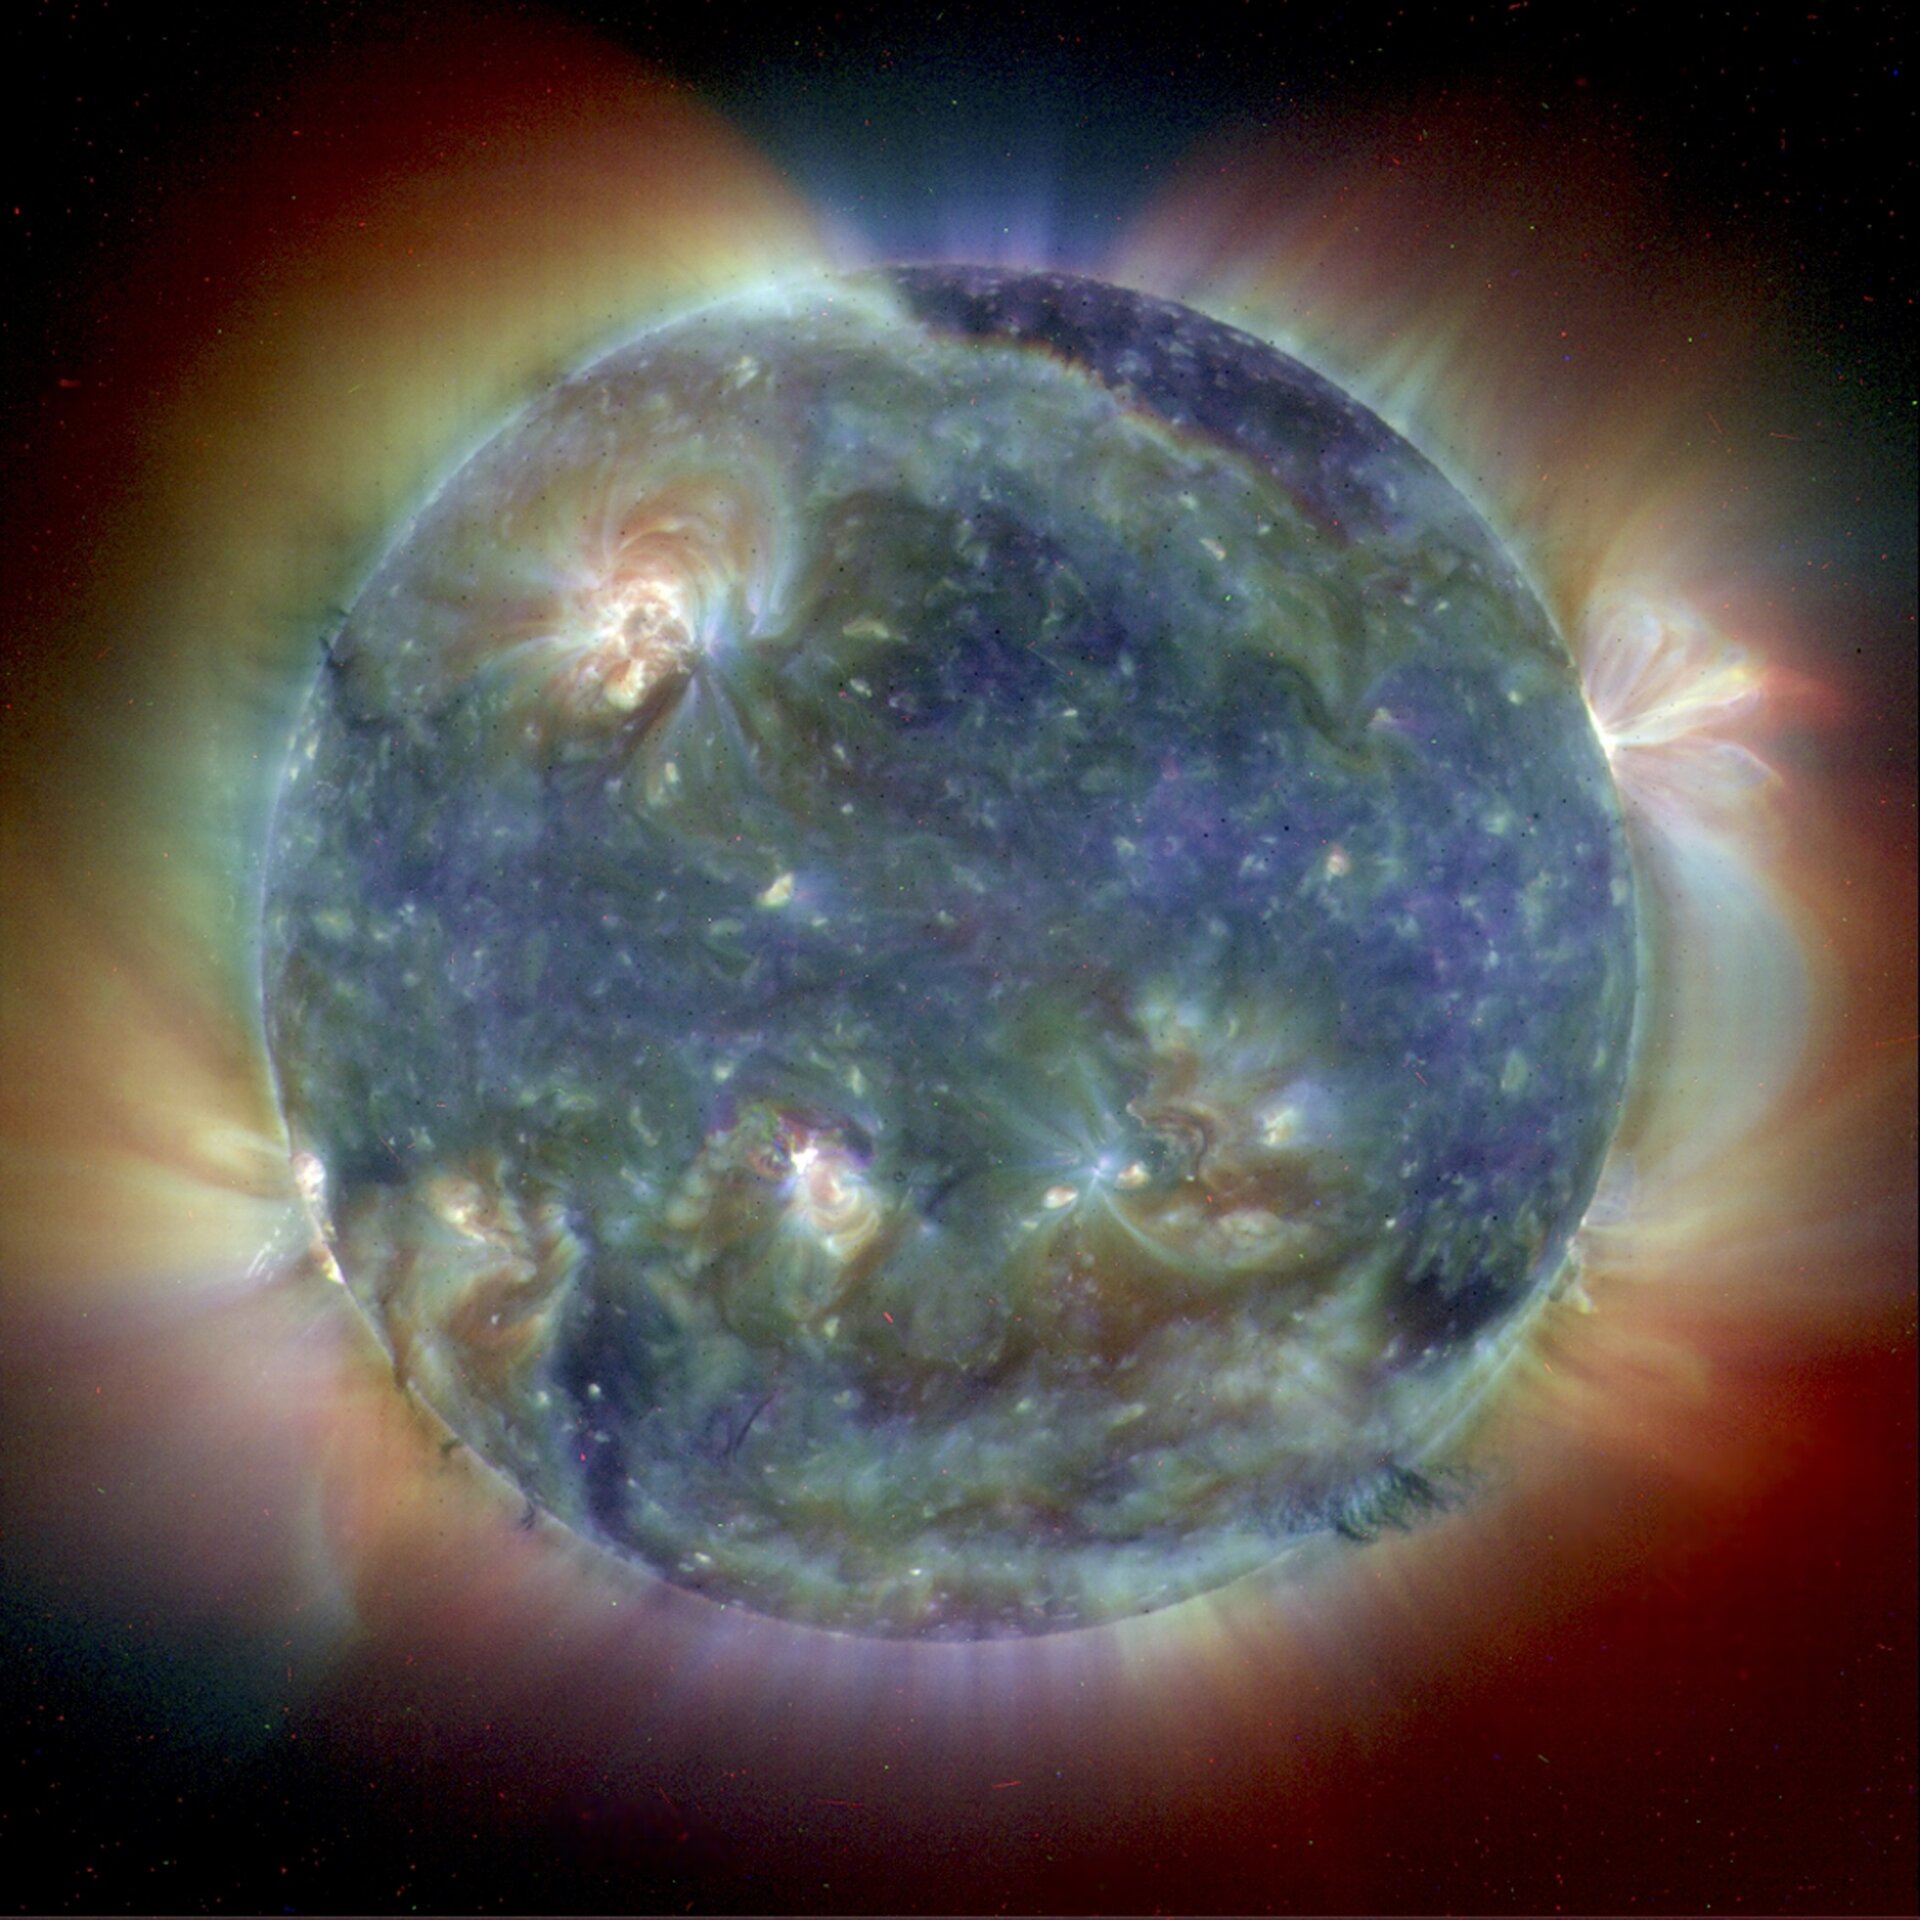 Ultraviolet image shows the Sun’s intricate atmosphere